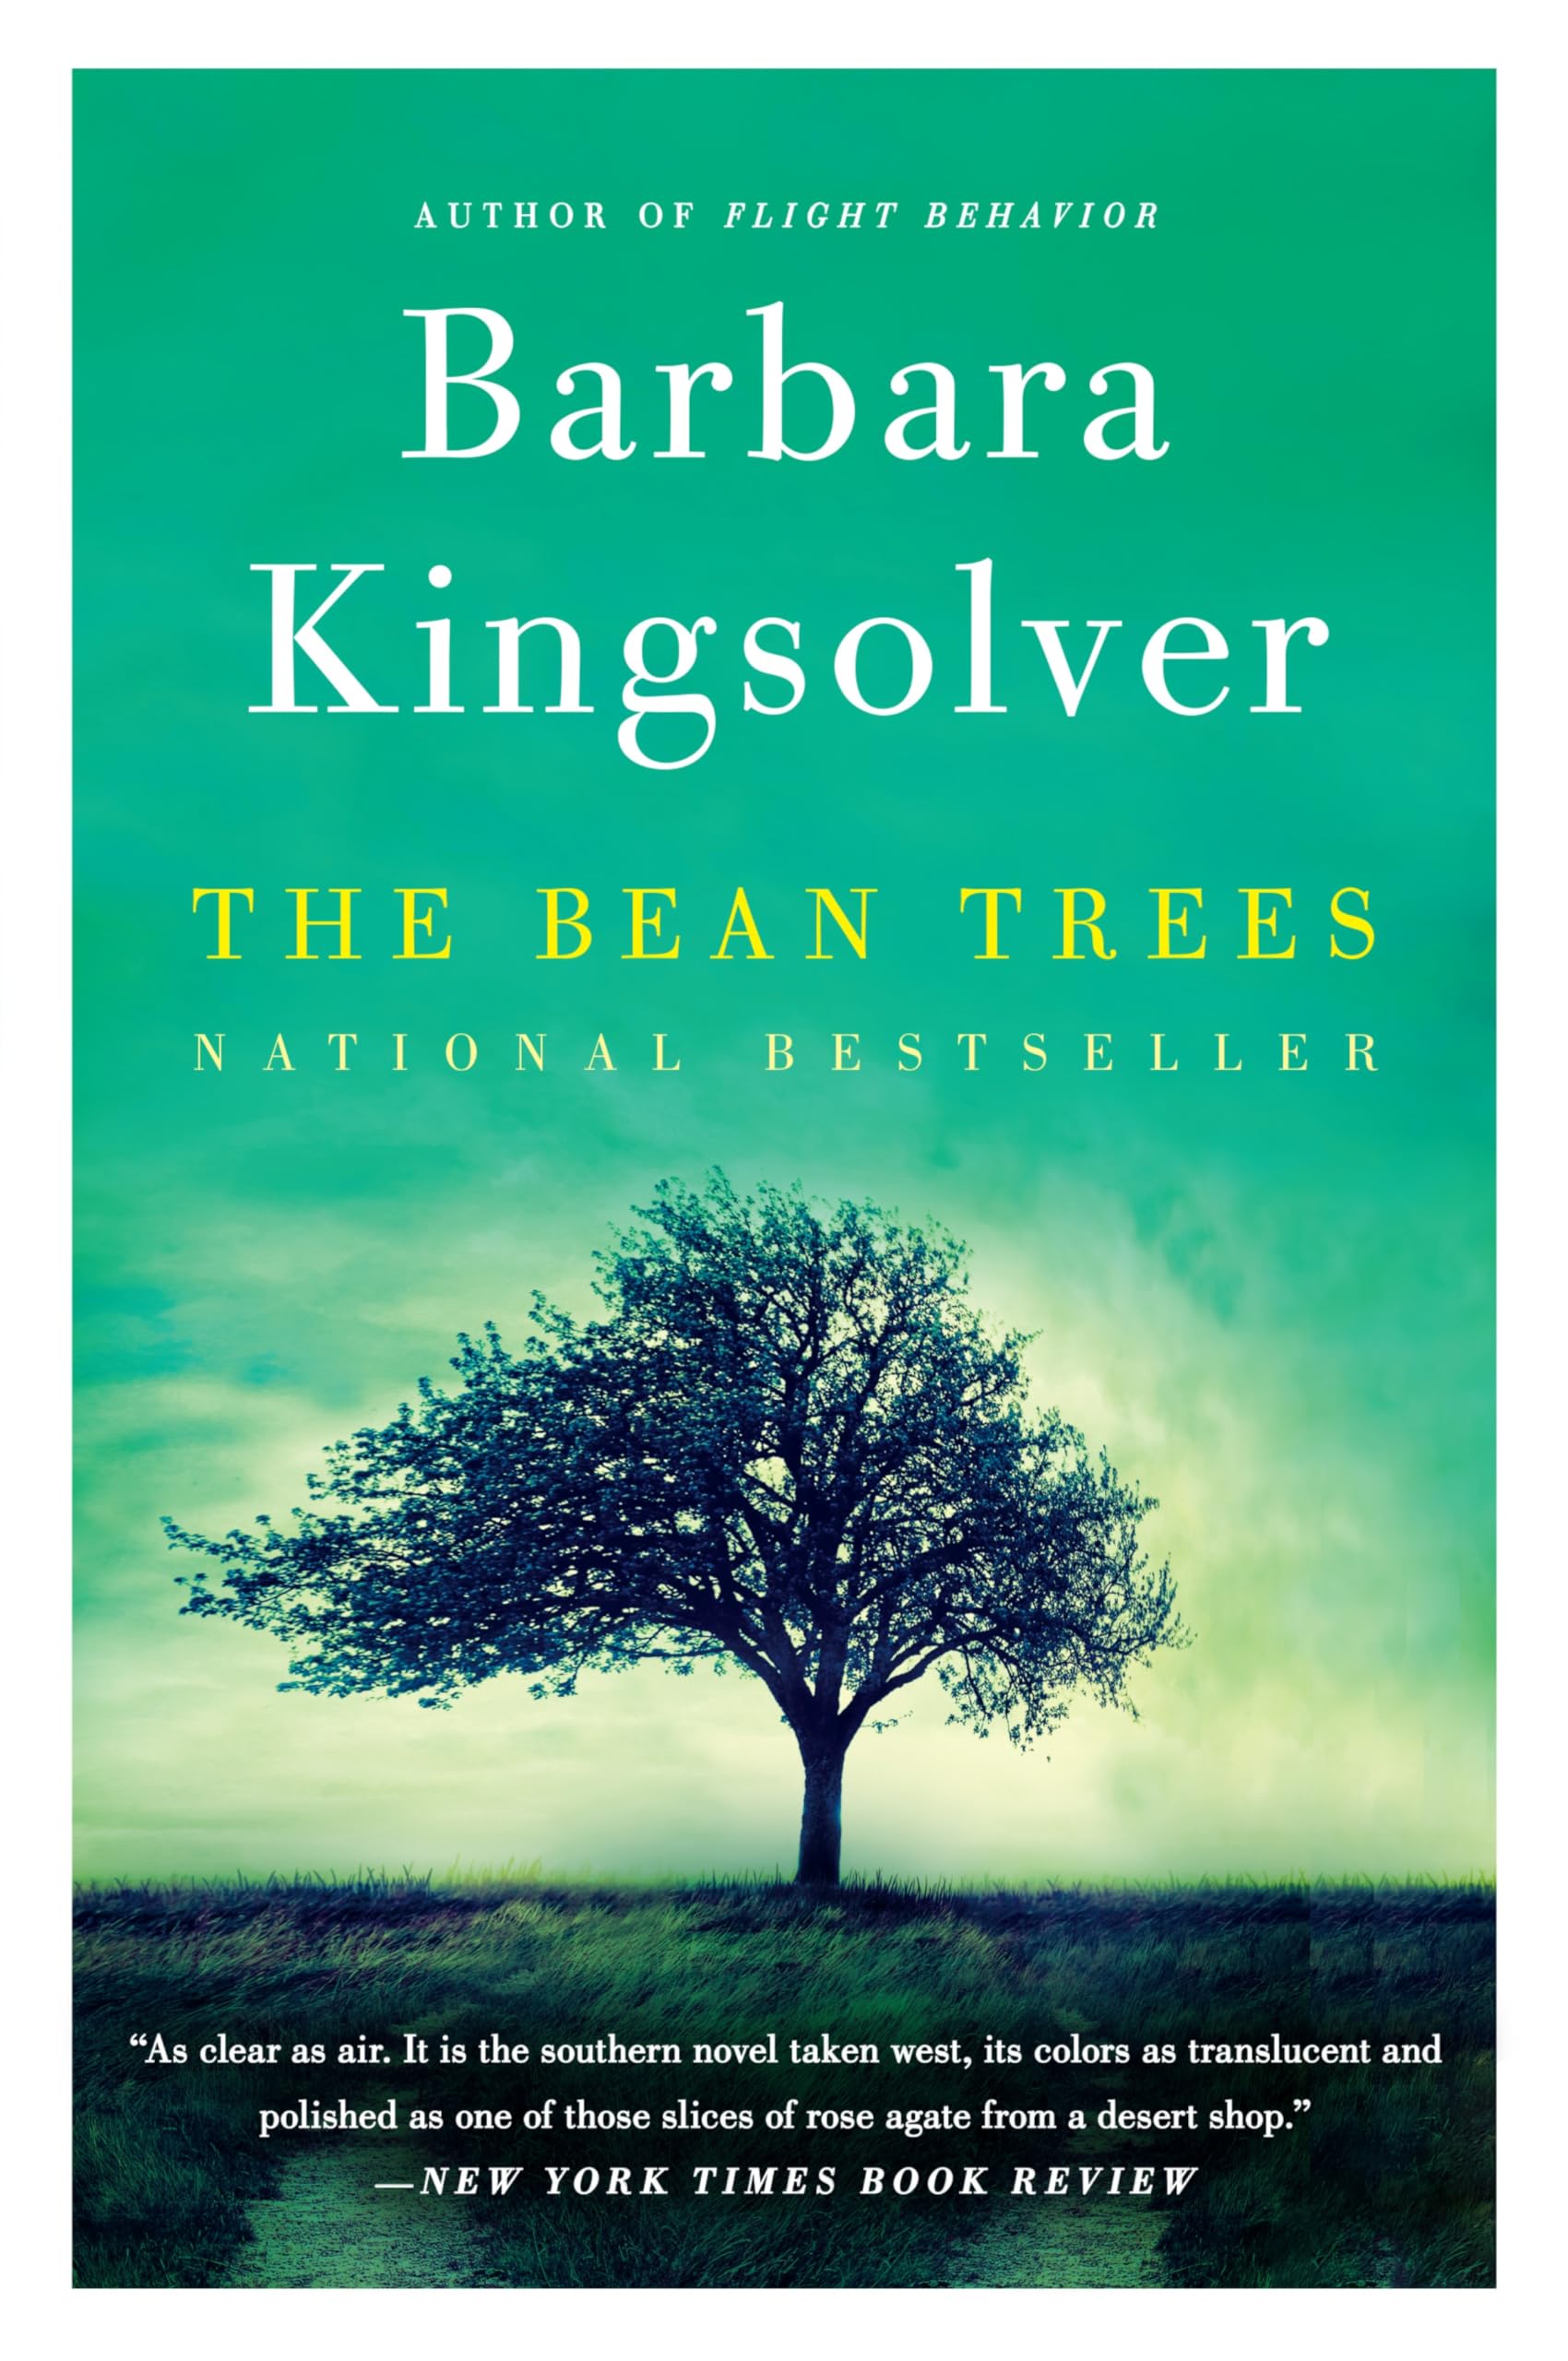 The Bean Trees by Kingsolver, Barbara